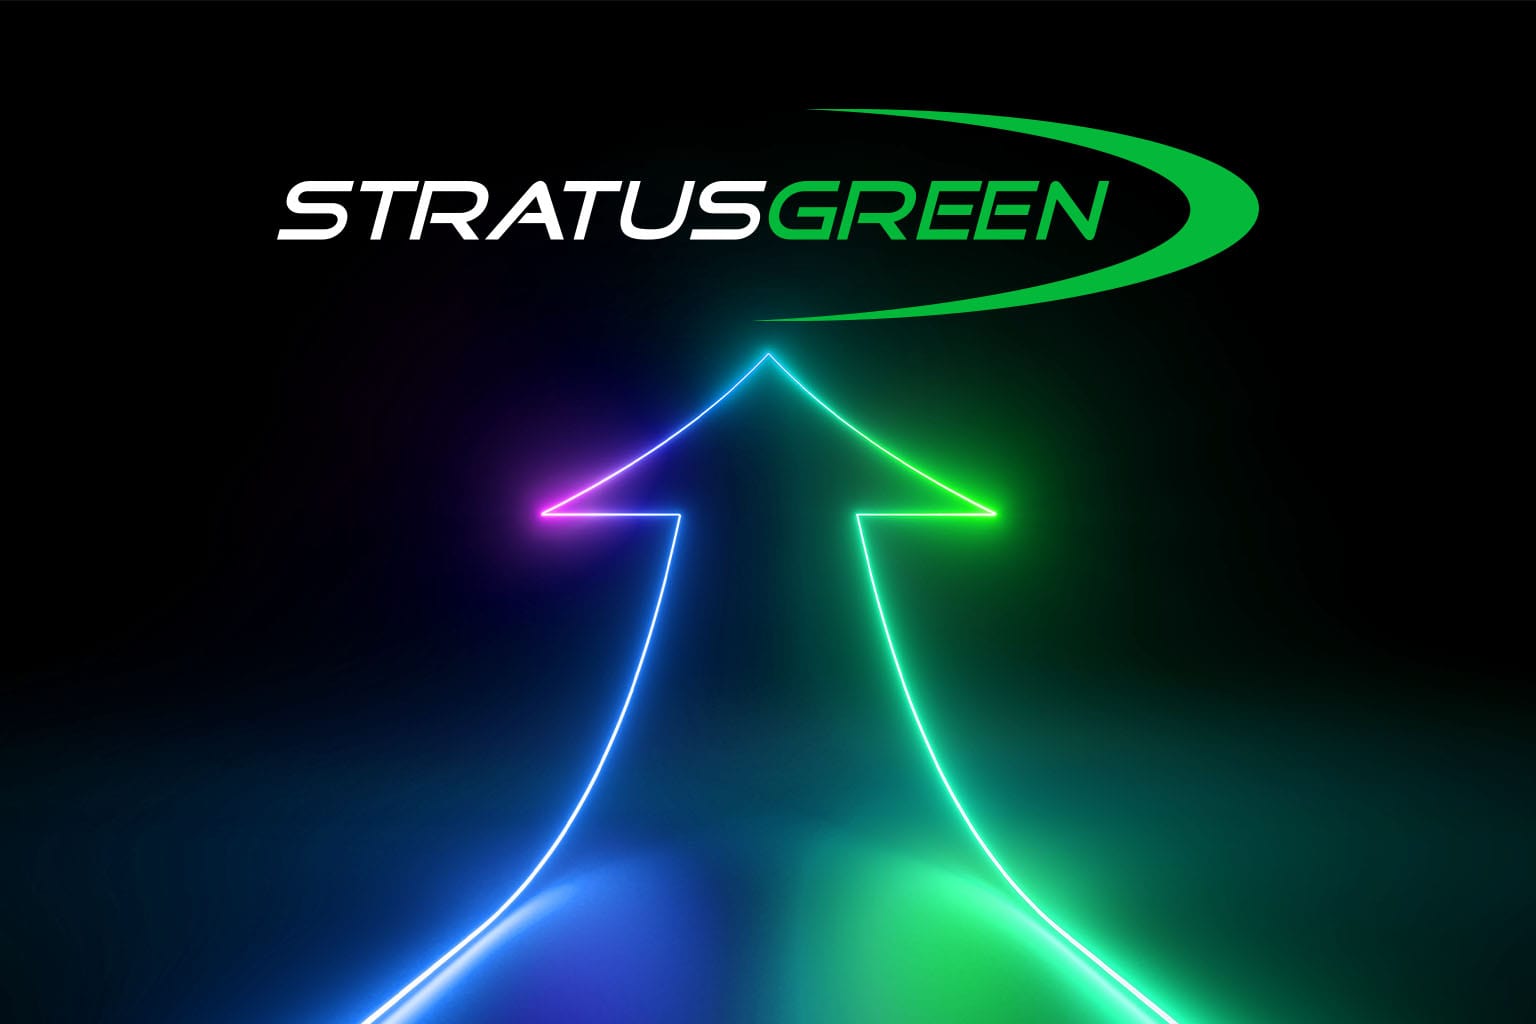 Arrow pointing up representing leveling up with StratusGreen